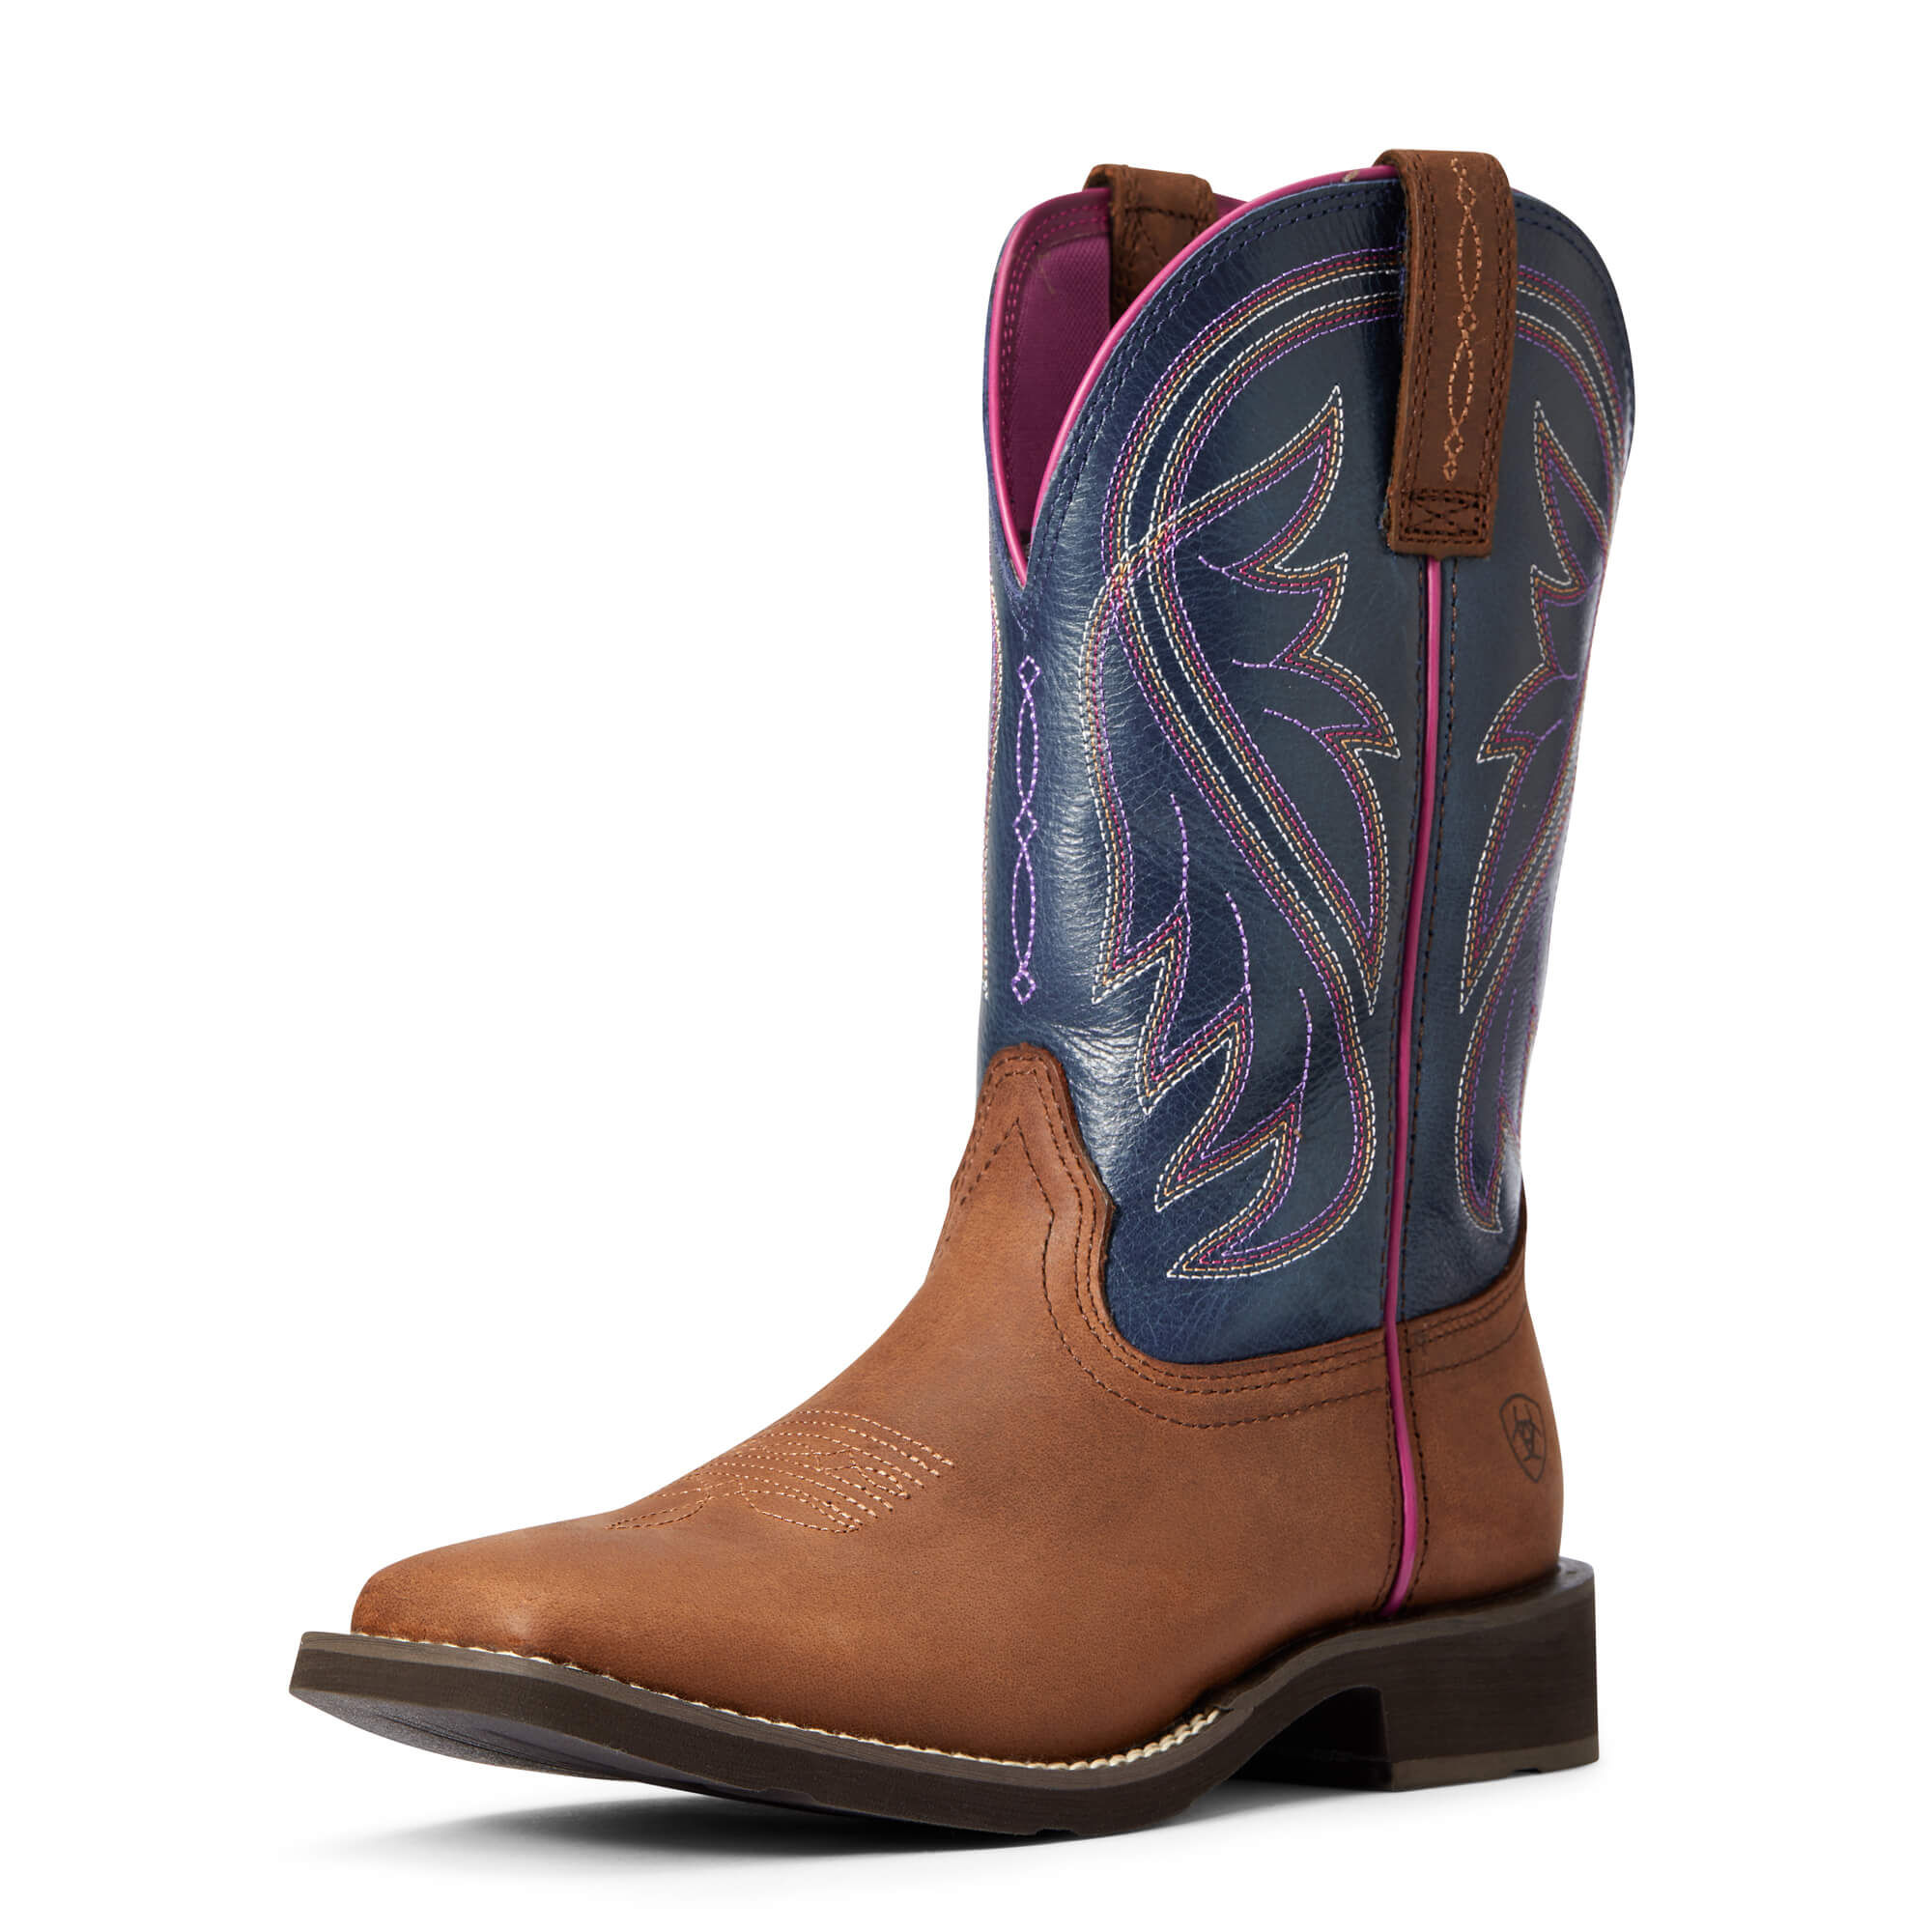 Cowboy Boots \u0026 Cowgirl Boots | Ariat